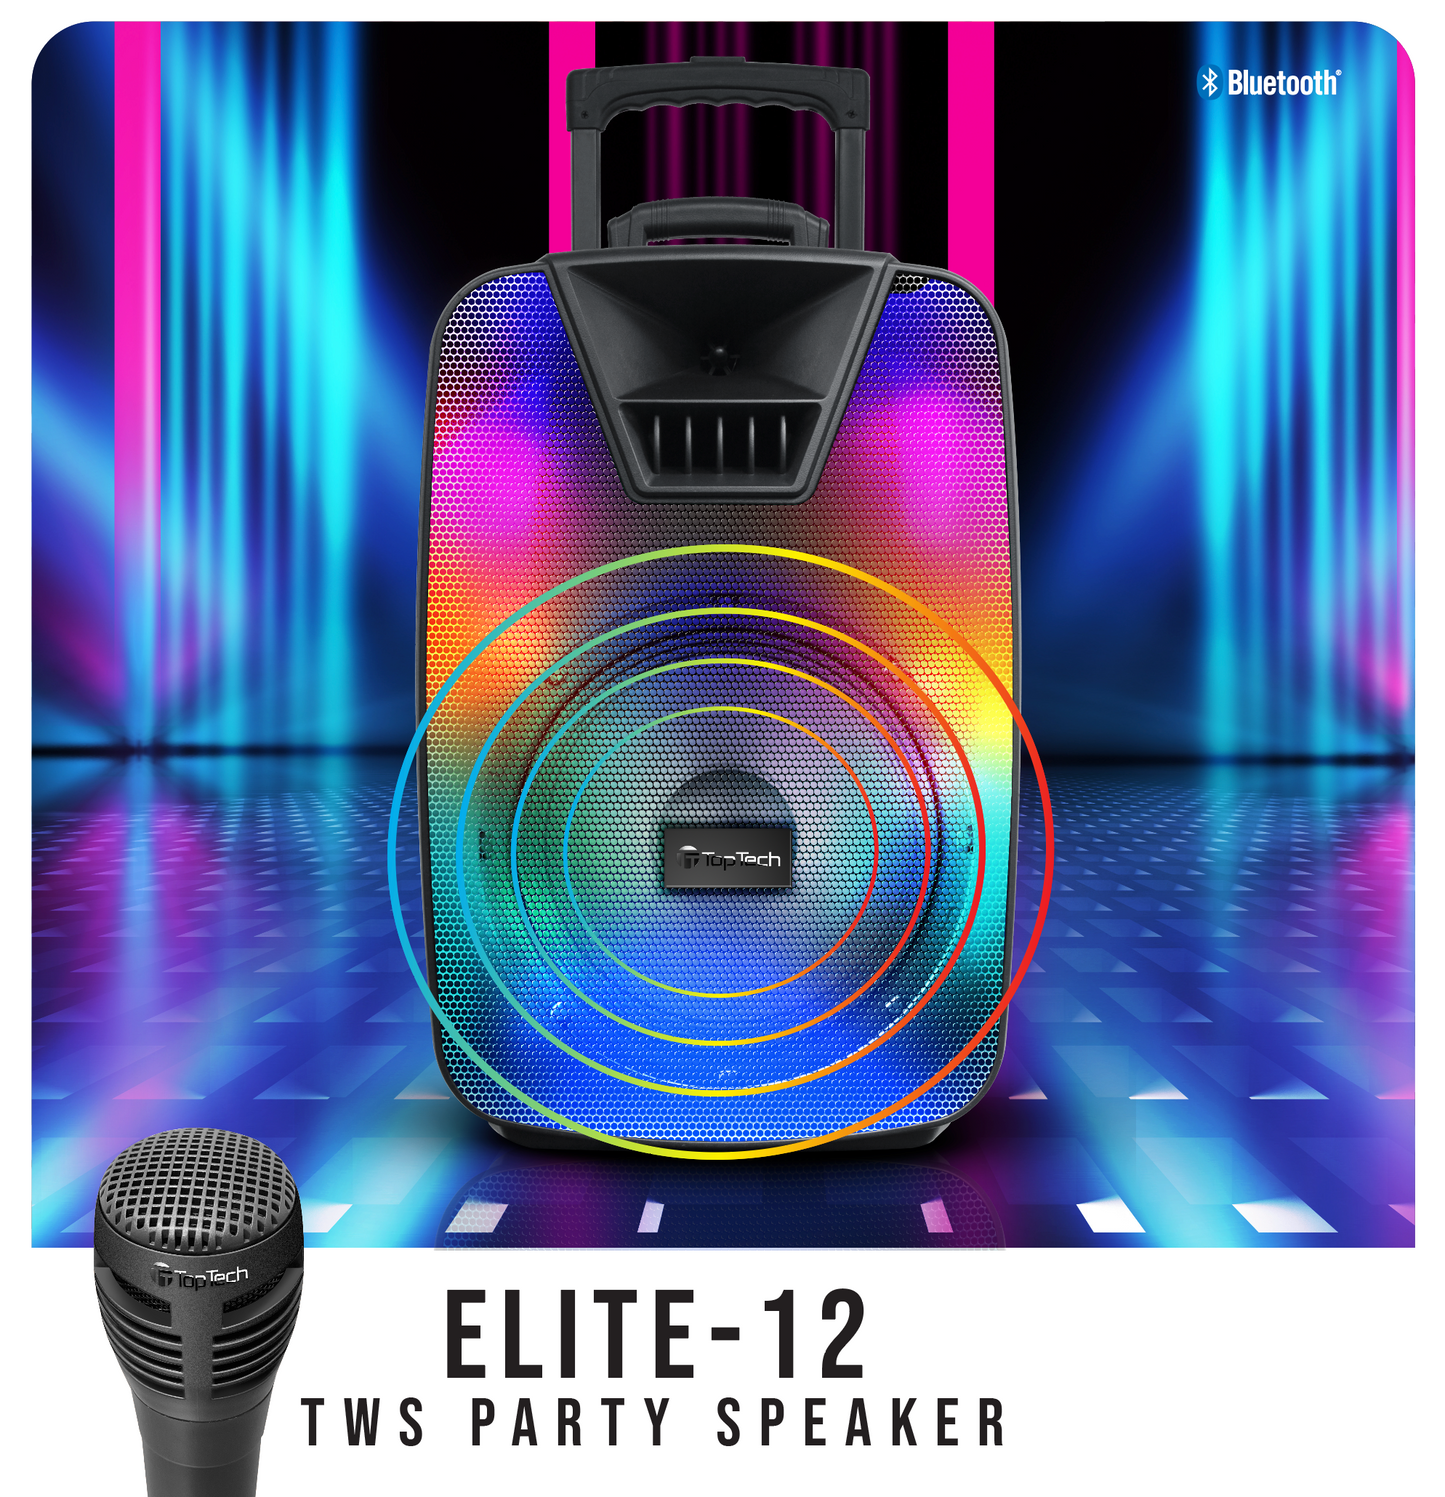 ELITE-12 Party Speaker with Flame Effect